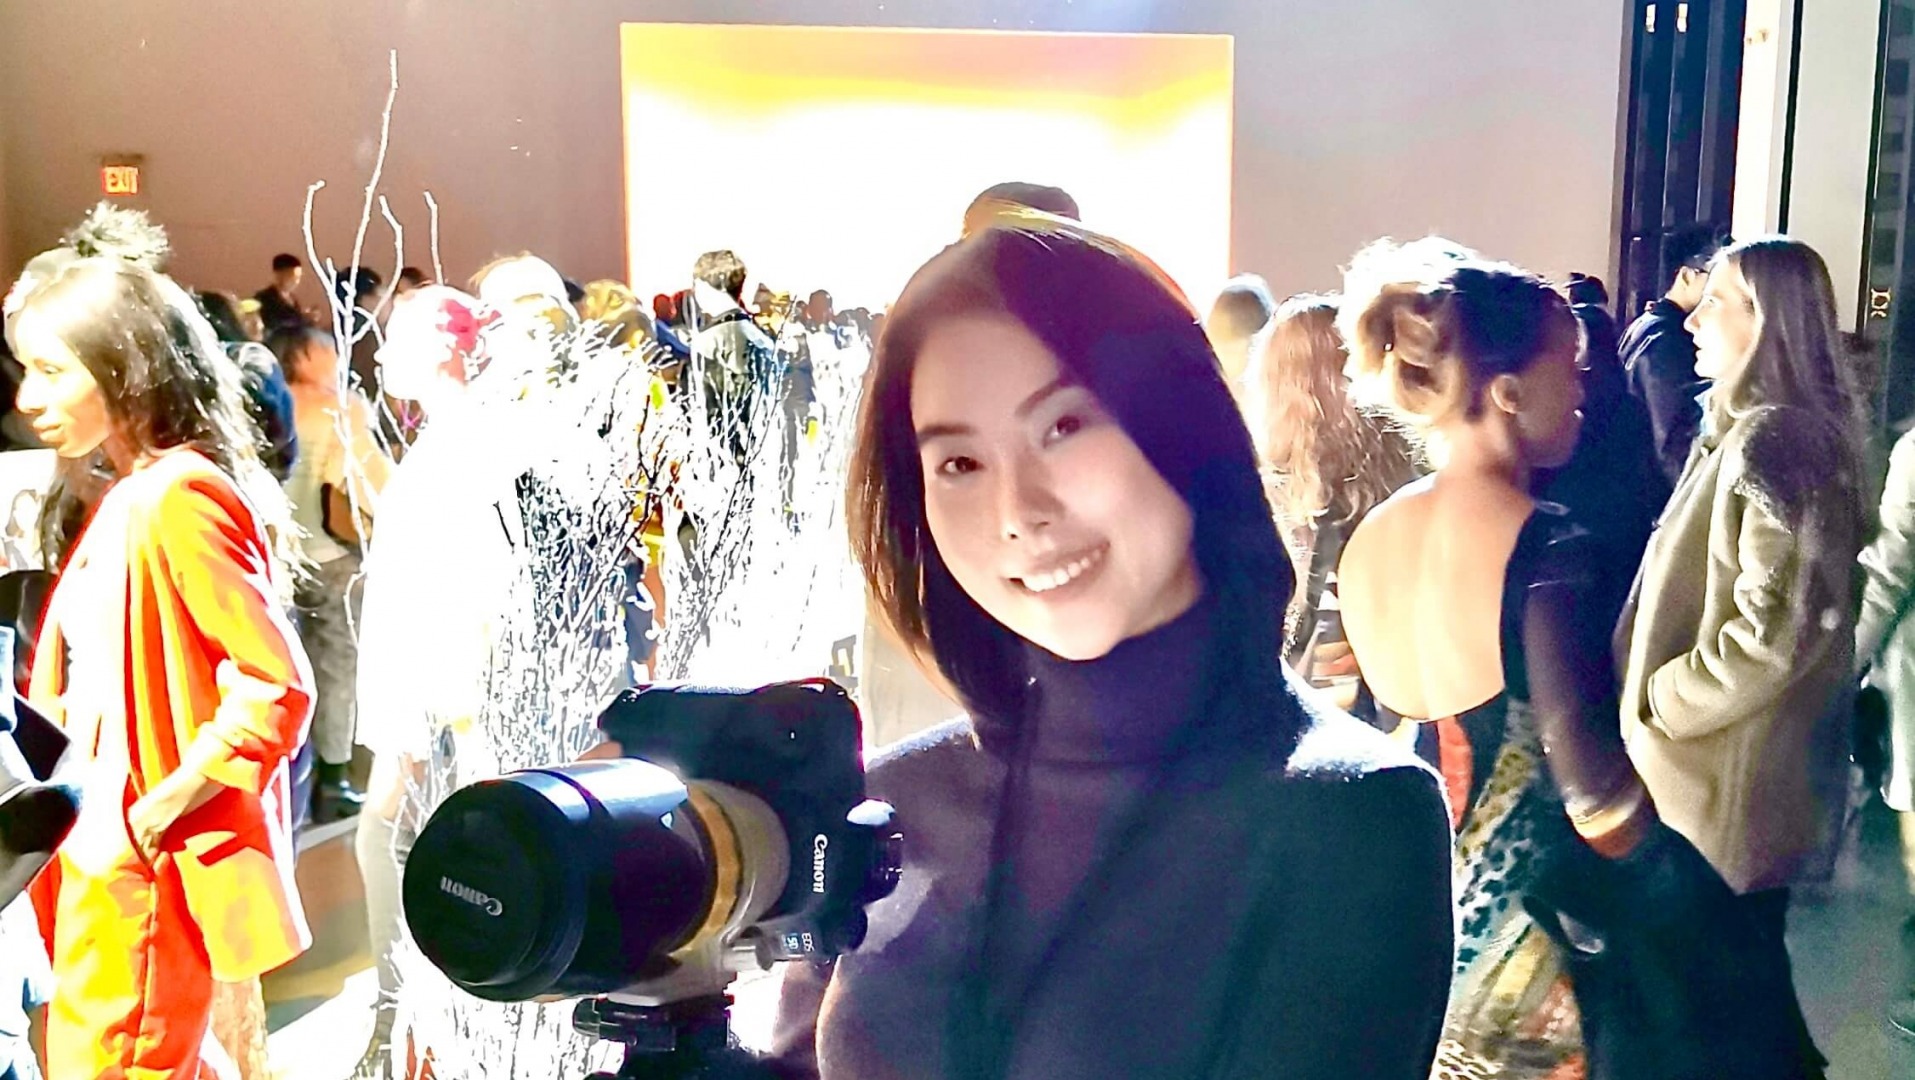 Photographer/Videographer Jiayi Liang Inspired by Fashion Runways and Nat Geo’s Famous Photographers